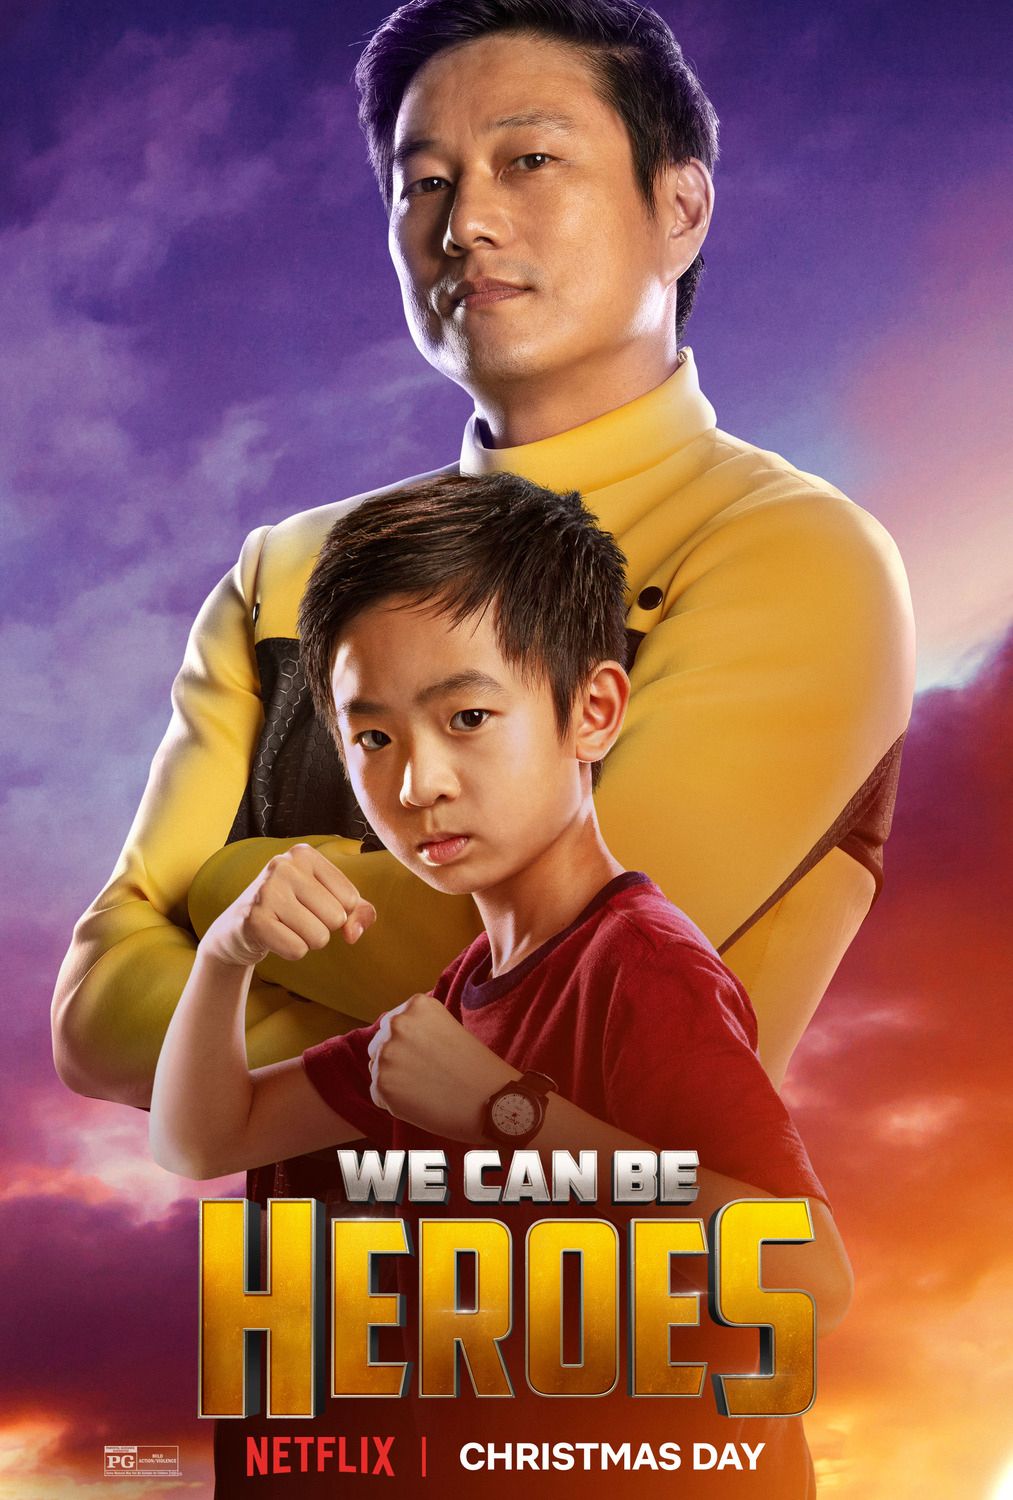 We Can Be Heroes Character Poster #11